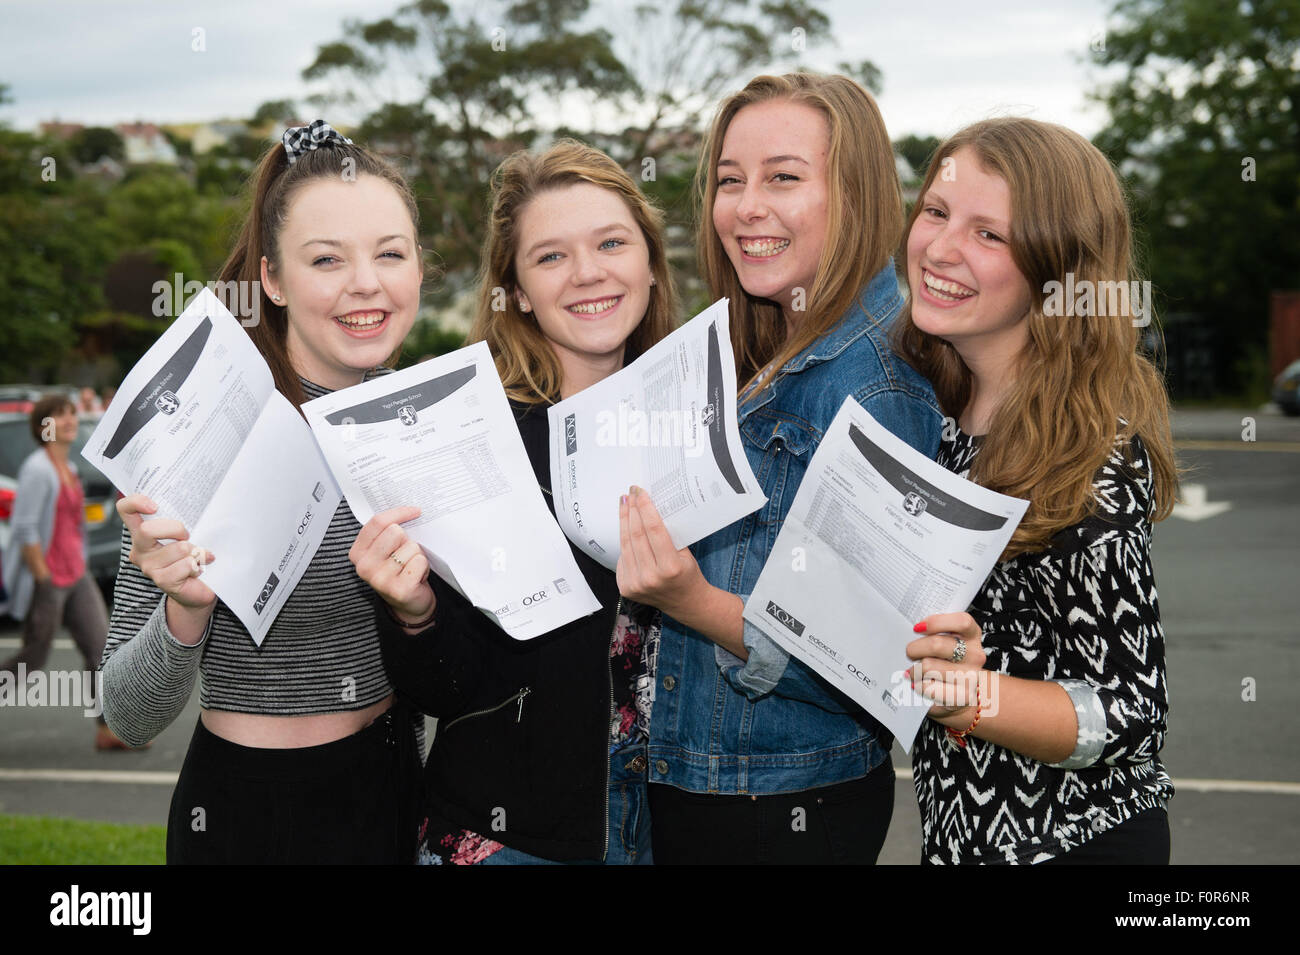 Aberystwyth Wales UK, Thursday 20 August 2015   Four 4 Year 11 teenage girls students Emily Walsh, Lorna Harper, Megan Evans and Robin Harris at Penglais School in Aberystwyth collecting their GCSE examination results. Across the UK GCSE grades A* to C have risen slightly this year, but top A* and A grades are marginally lower. Overall the proportion of A* to C grades rose to 69%, up from 68.8% in 2014, but A* grades fell by 0.1% photo Credit:  Keith Morris/Alamy Live News Stock Photo